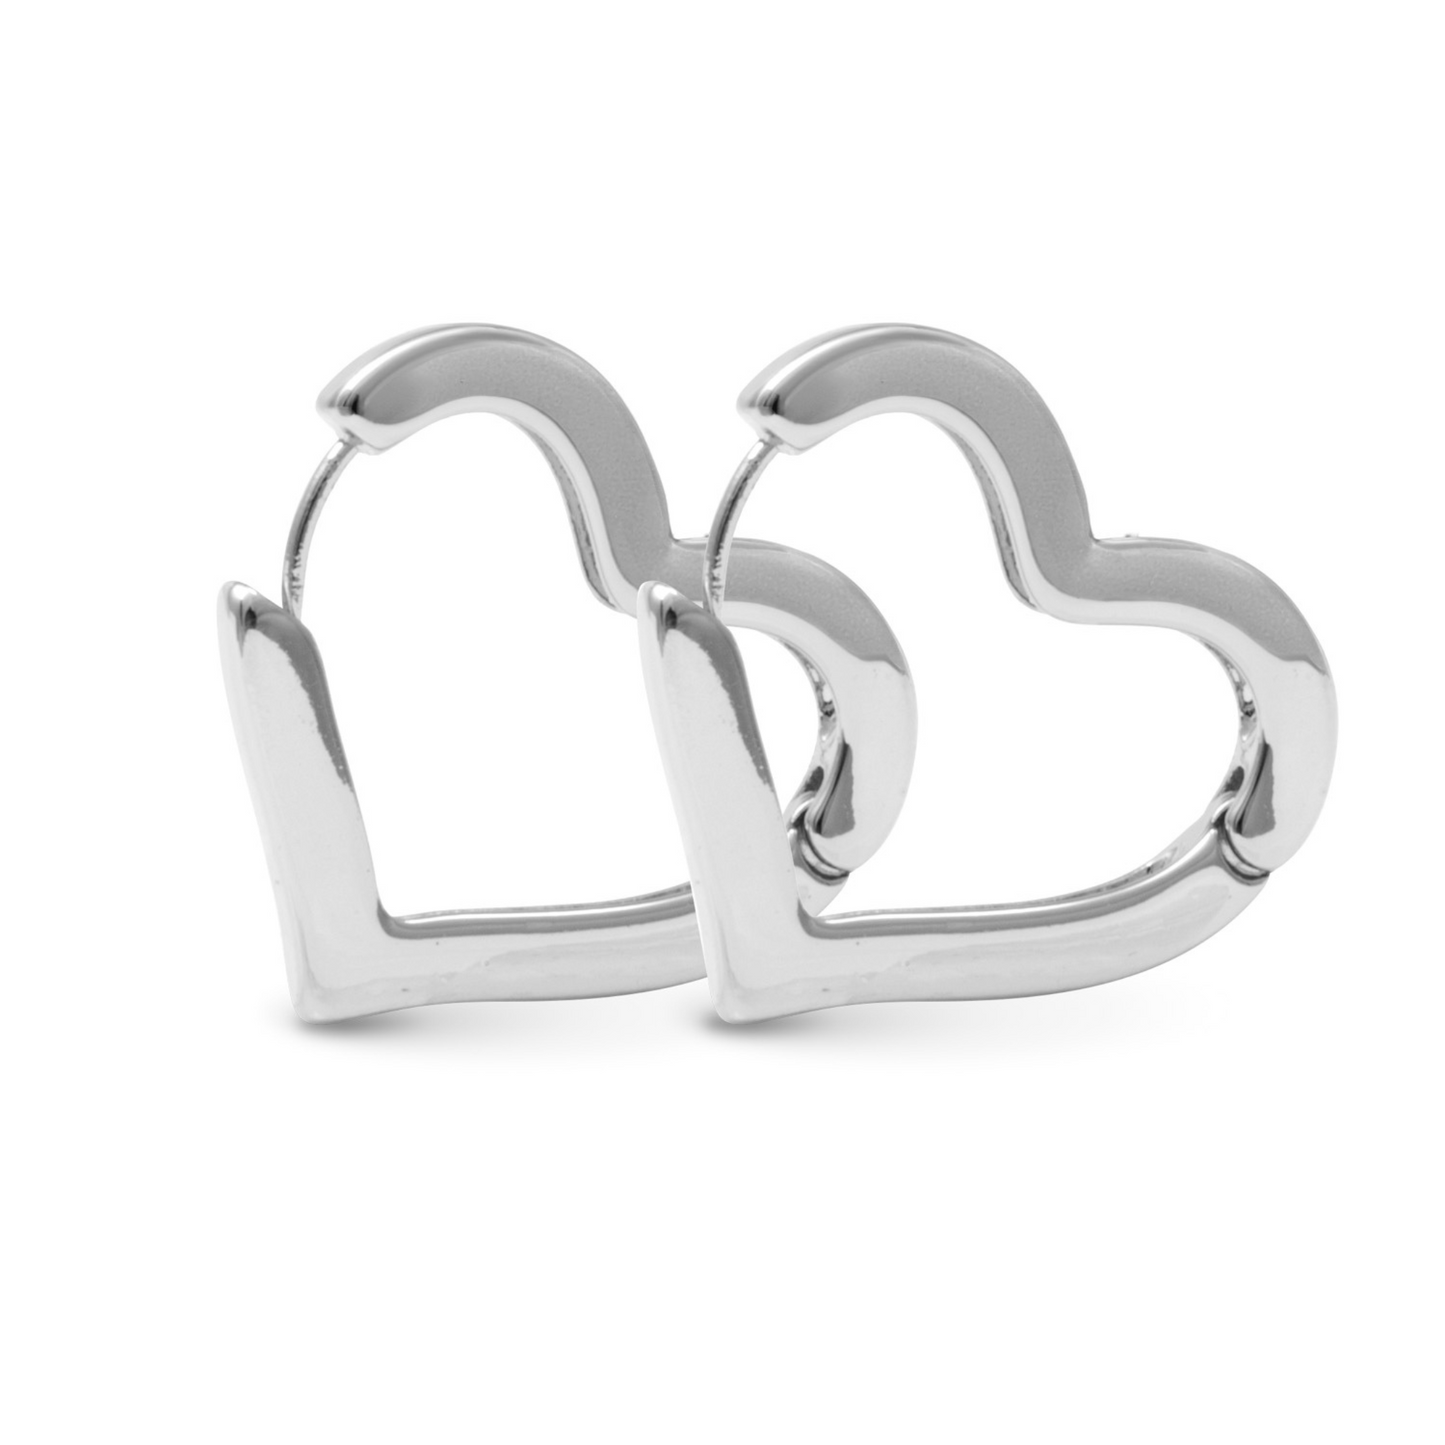 Introducing Sara Heart Hoops, expertly crafted with a polished silver finish. These heart-shaped earrings are the perfect accessory for any occasion, adding a touch of elegance and style to your look. Made from high-quality materials, these hoops are sure to make a statement and elevate your wardrobe.